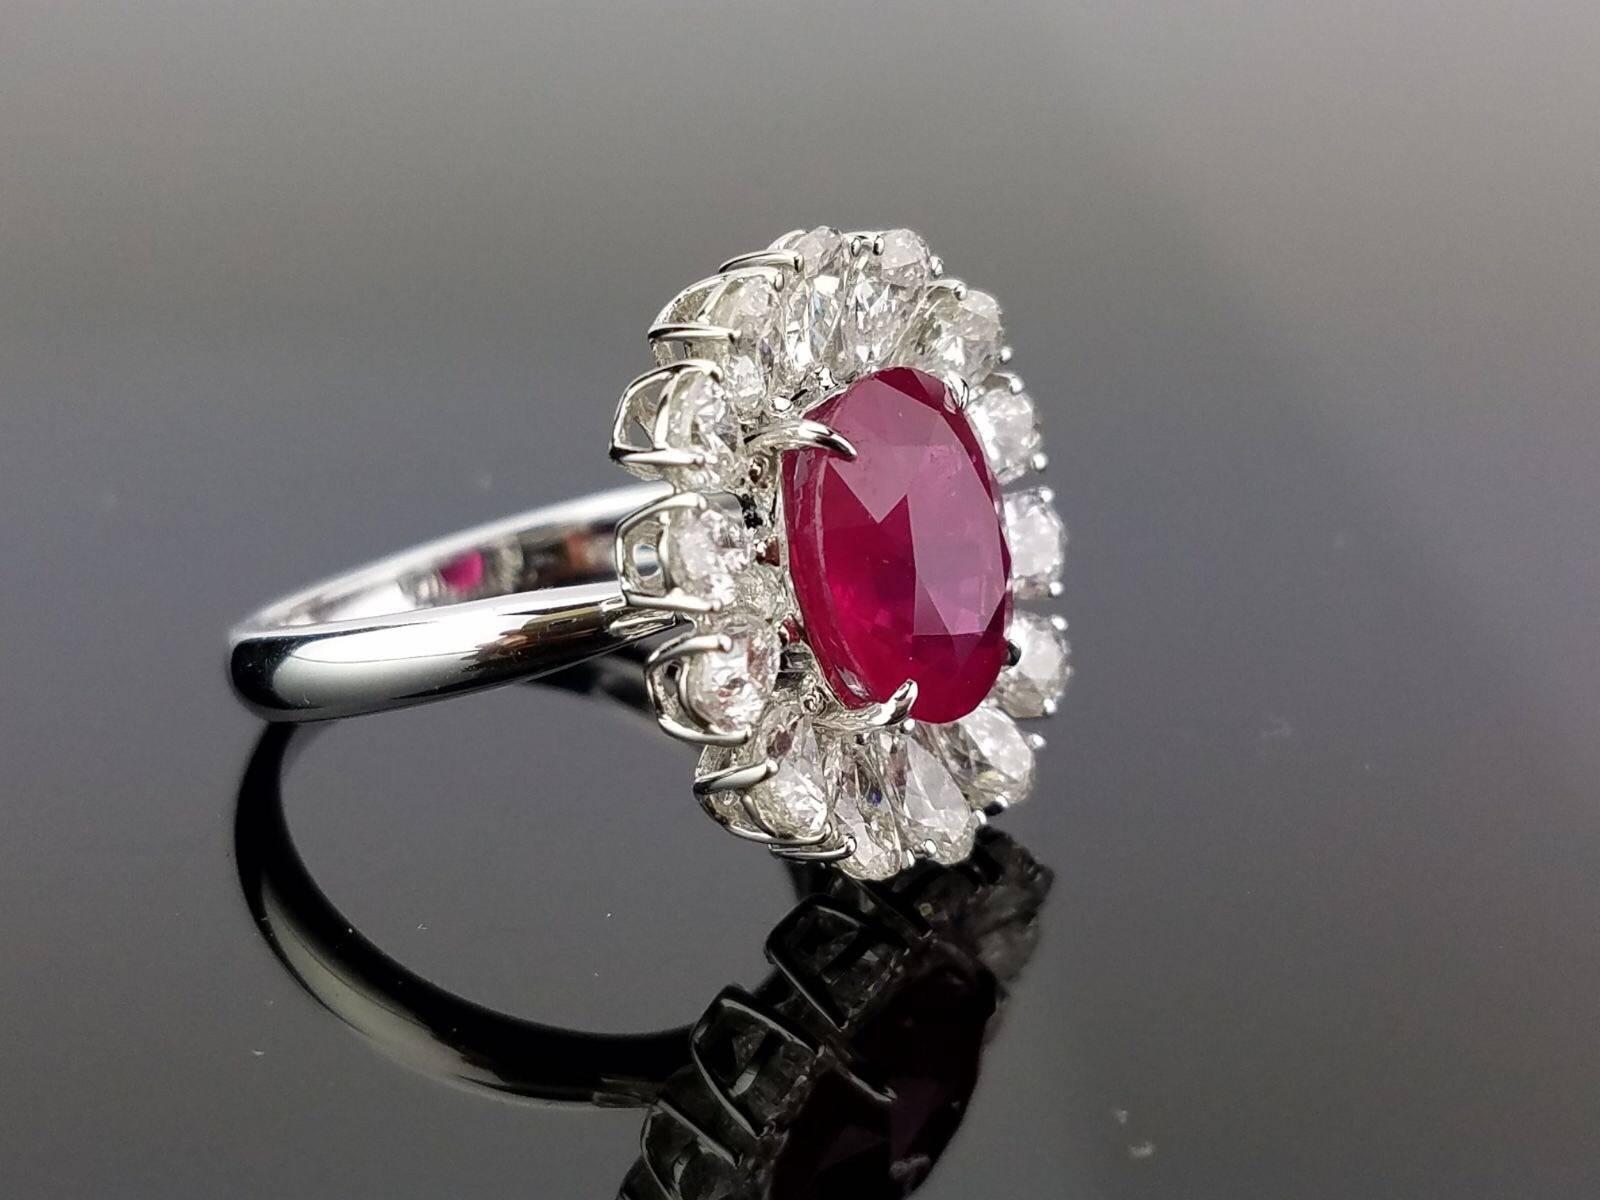 A beautiful oval heated Burmese Ruby and pear-shaped White Diamond cocktail ring and studs suite set, all set in 18K white gold. 

Ring:
Stone: Burma Ruby, 4.10 carat
Diamond: VS / H,I , 2.54 carat
18K Gold: 5.32 grams

Earrings:
Stone: Burma Ruby,